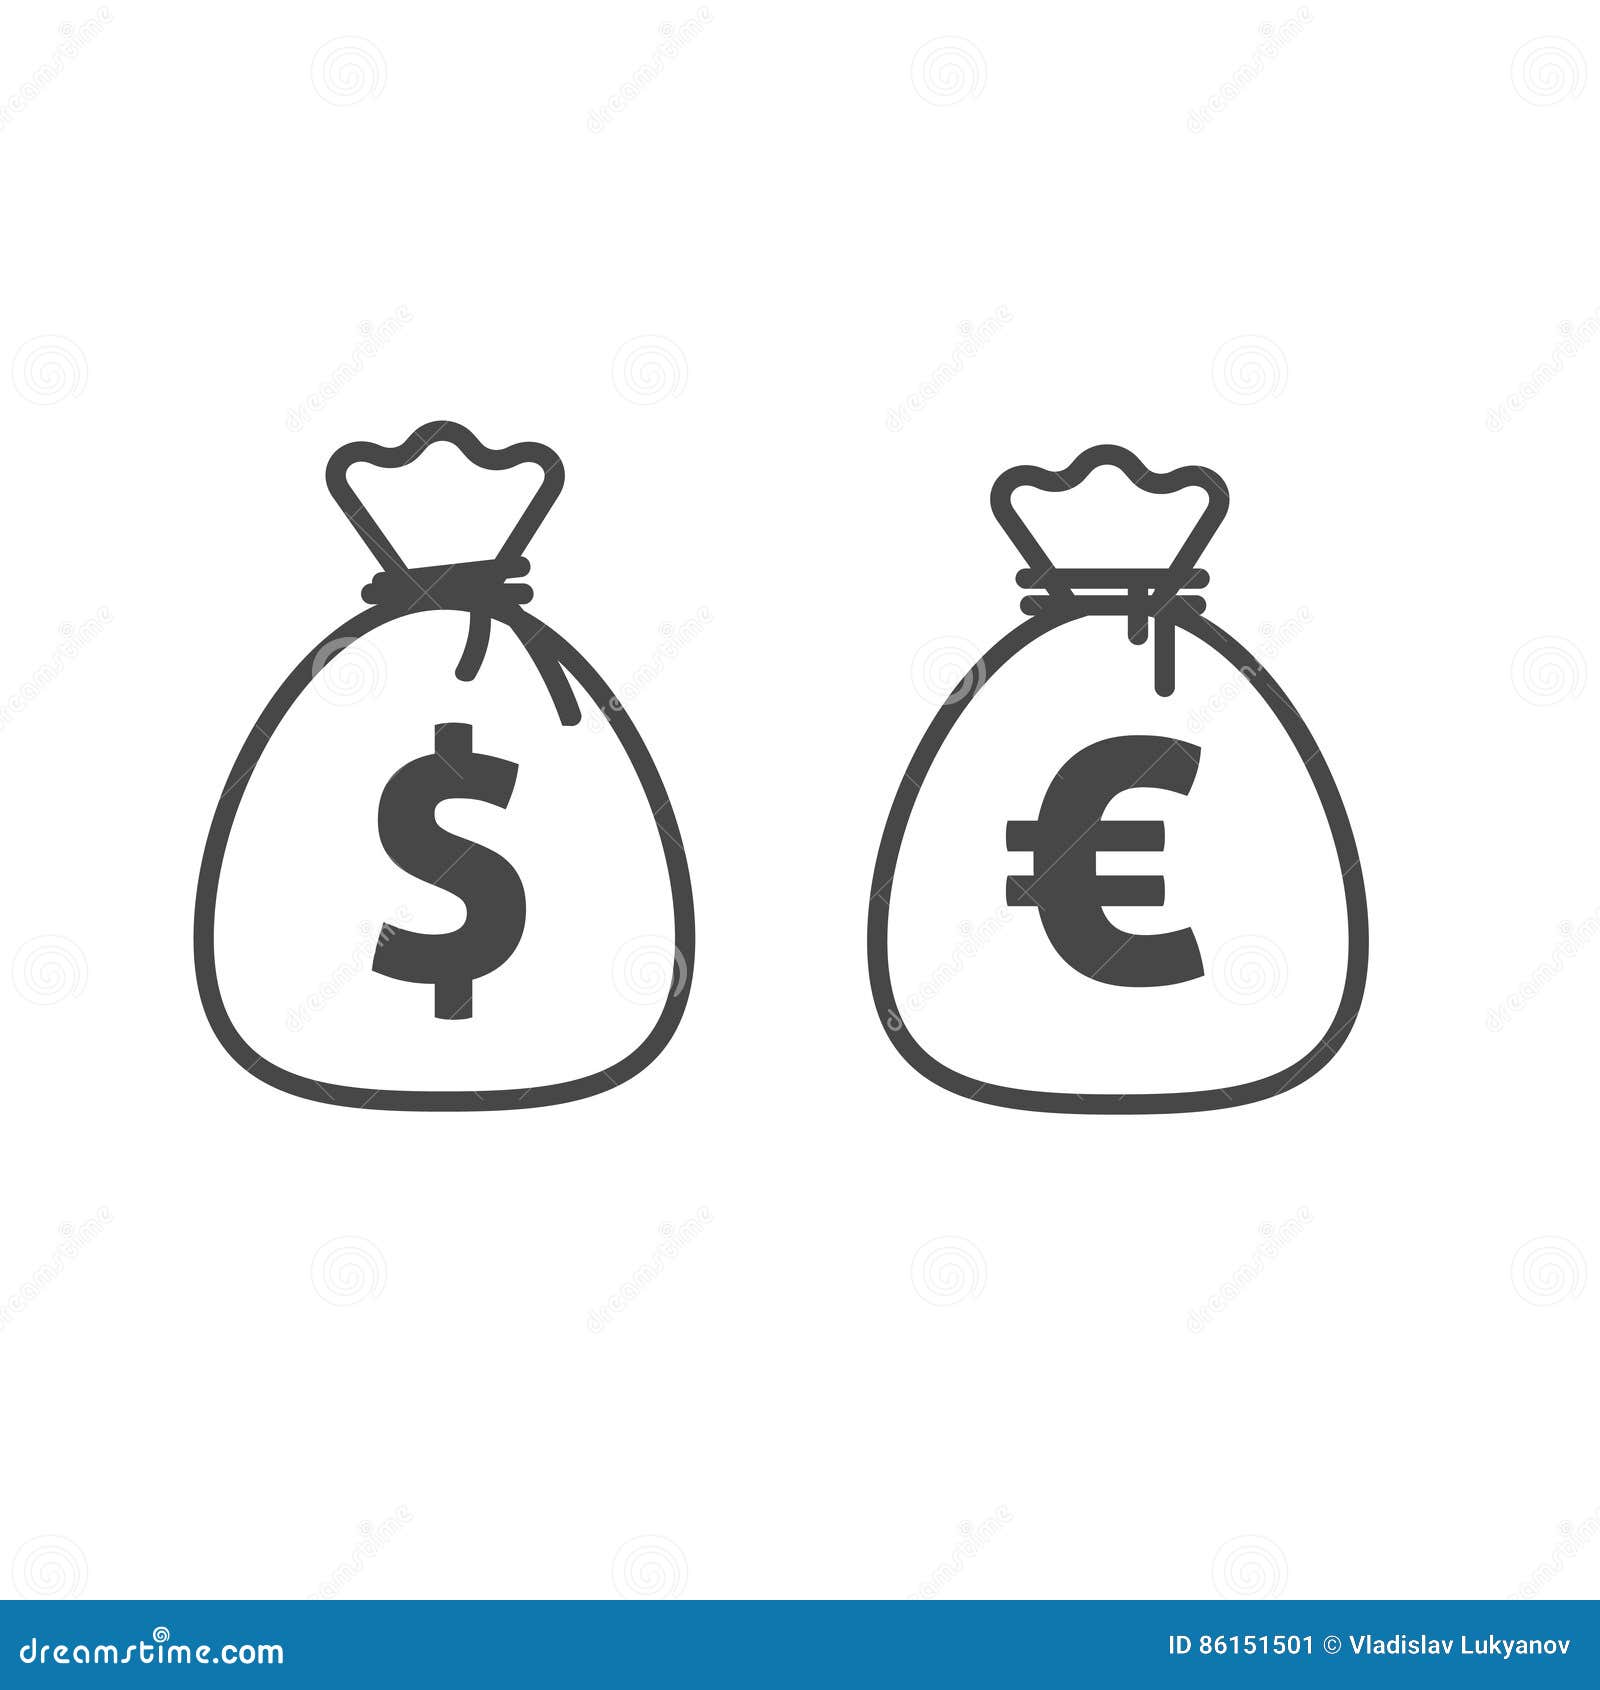 money bag  icon line outline style, dollar and euro currency moneybag